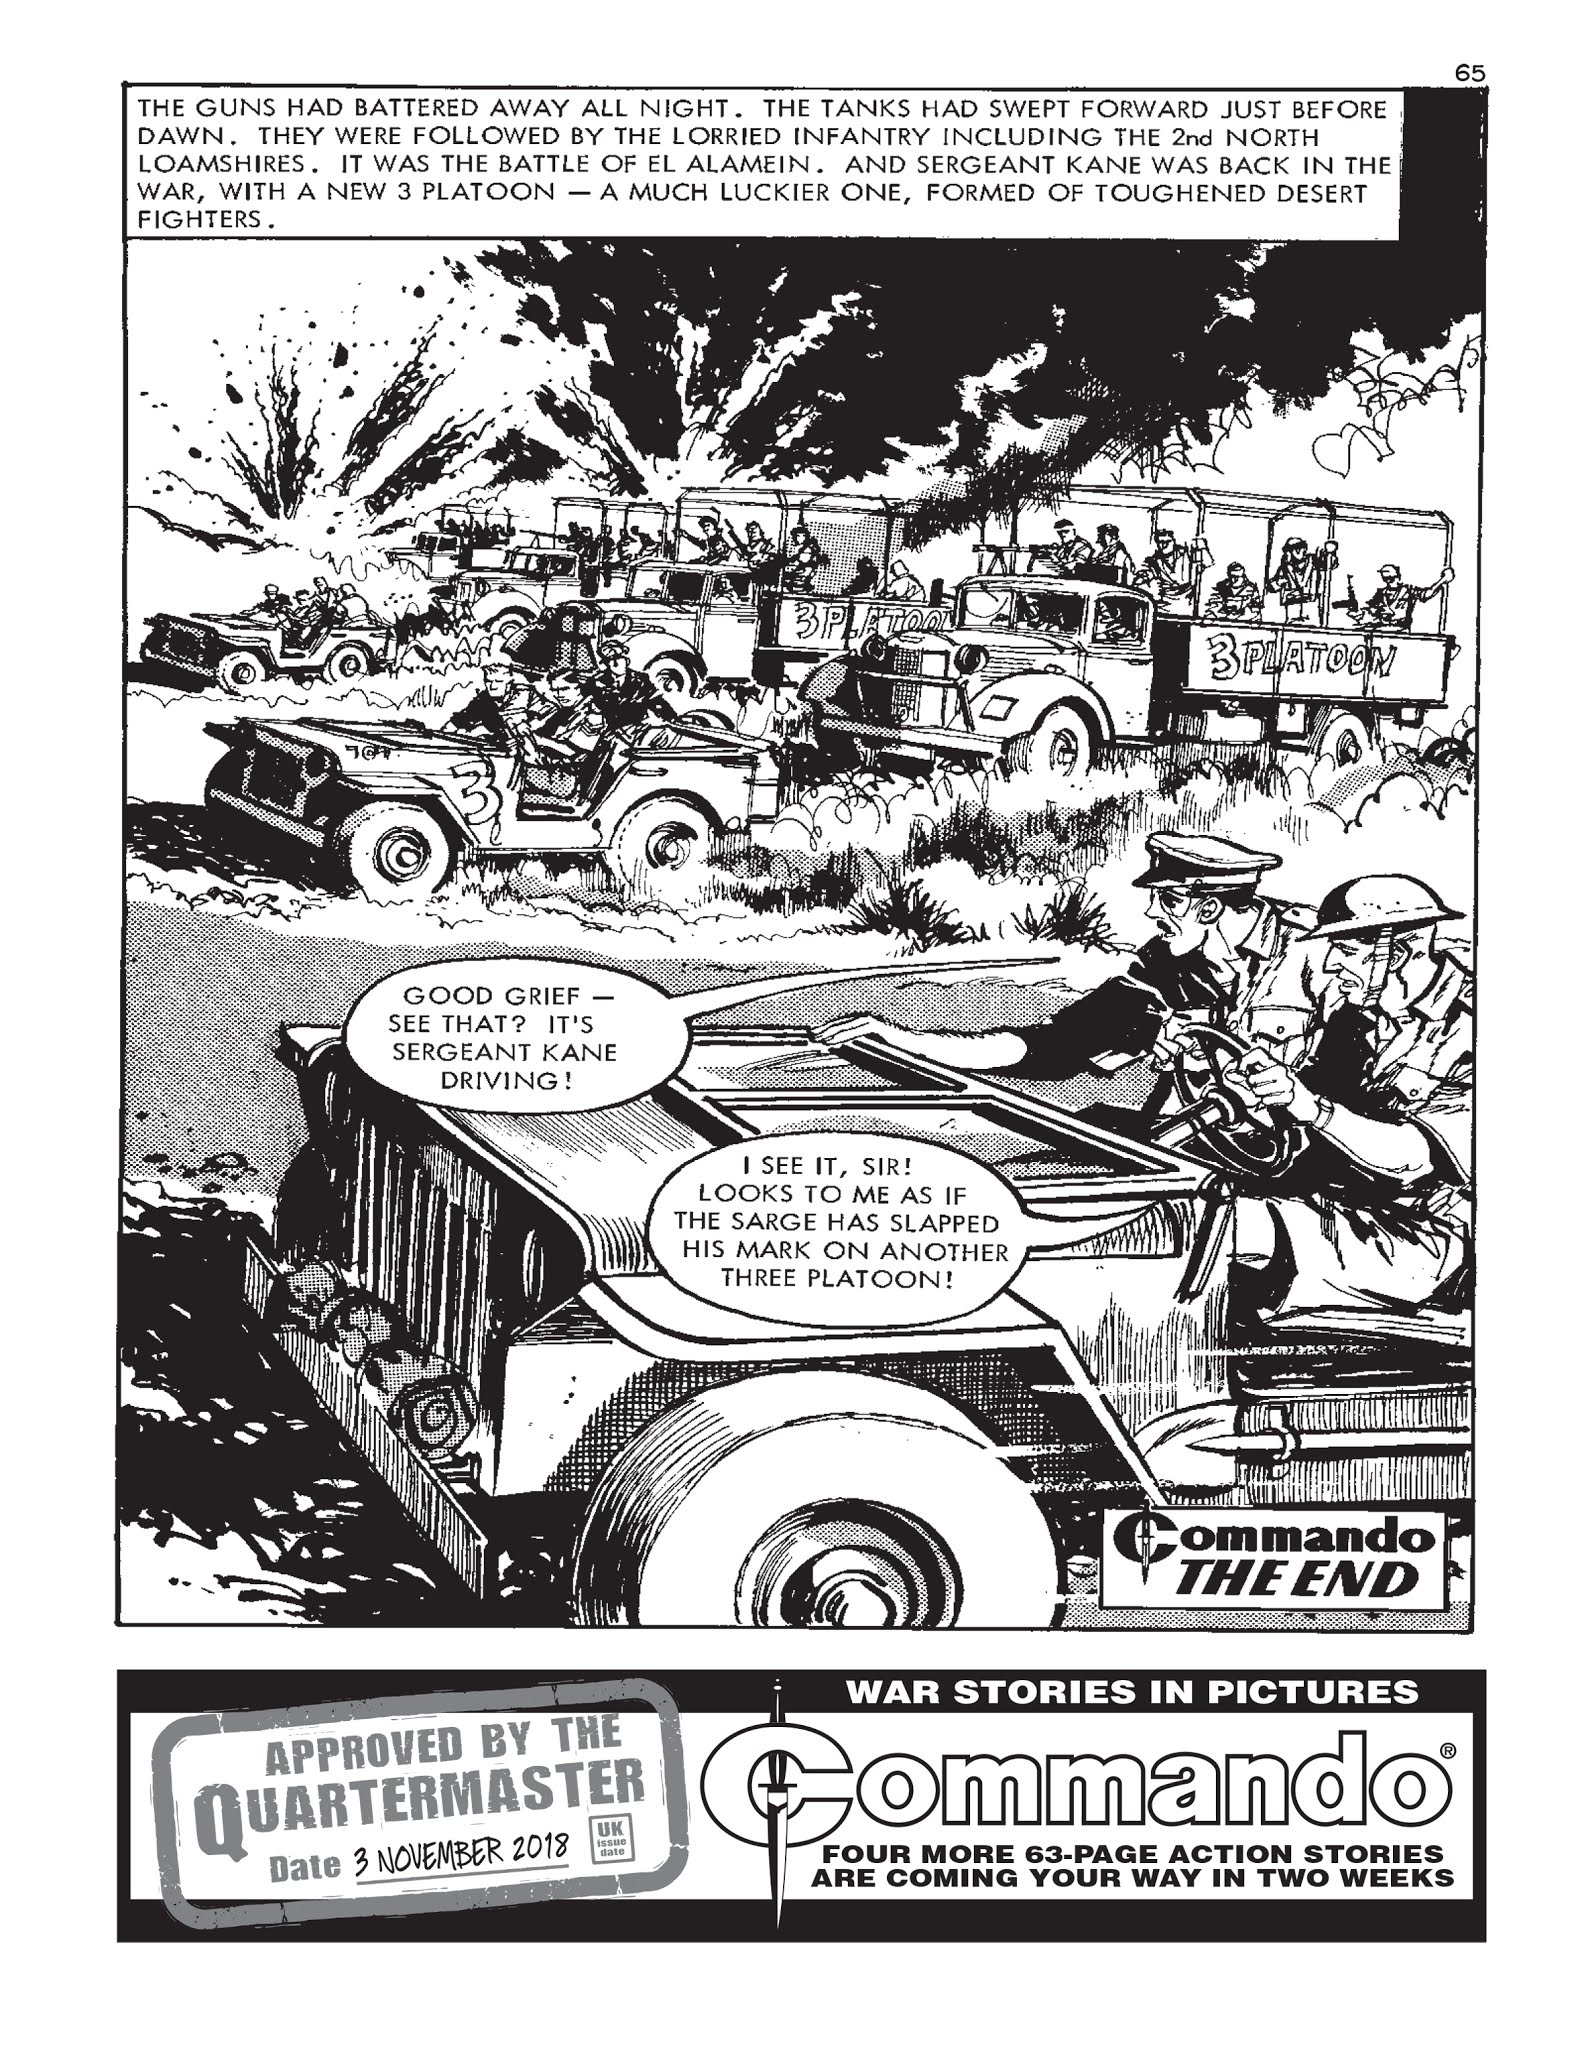 Read online Commando: For Action and Adventure comic -  Issue #5168 - 65